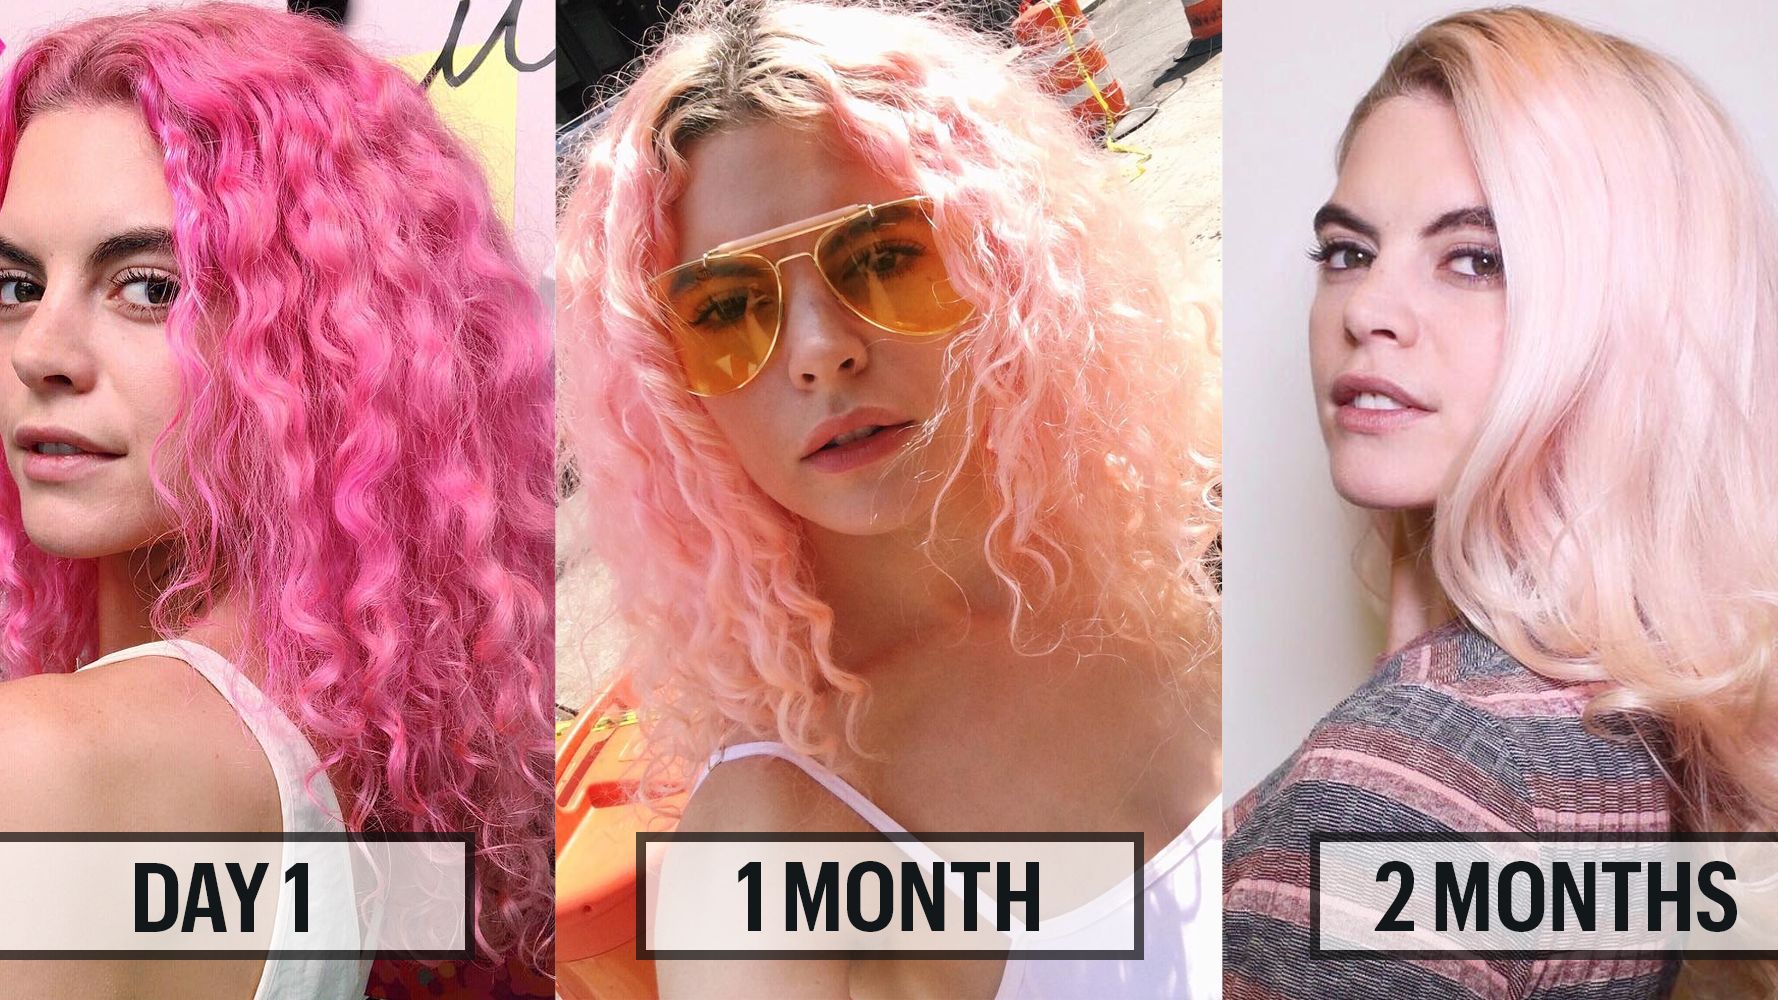 Why You Should Dye Your Hair Pink - Every Stage of a Pink Dye Job